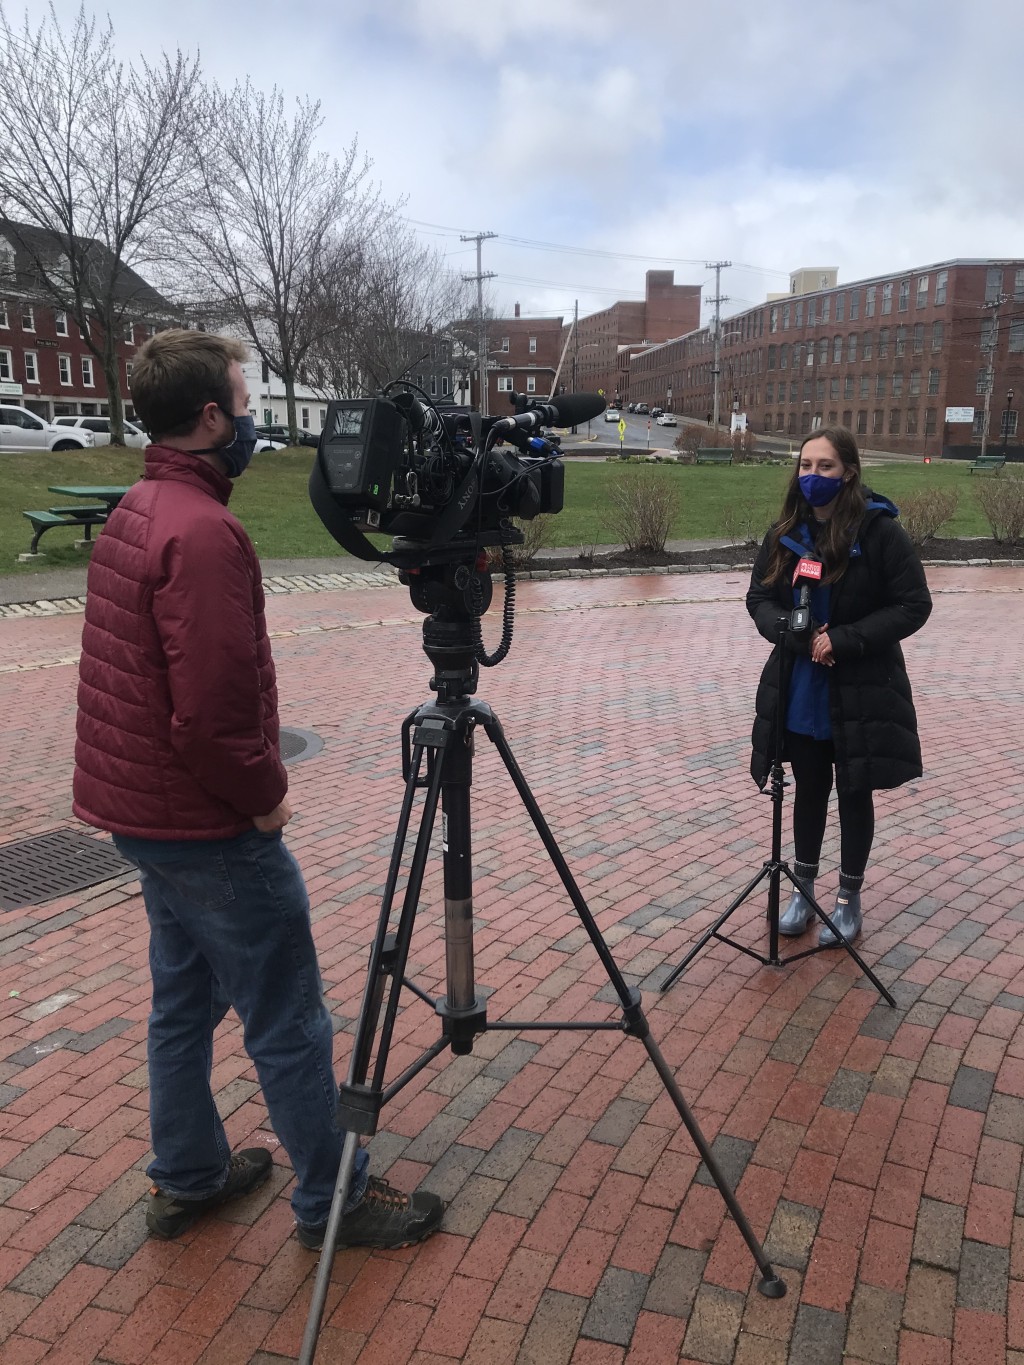 Student volunteer leader interviewed by local television station